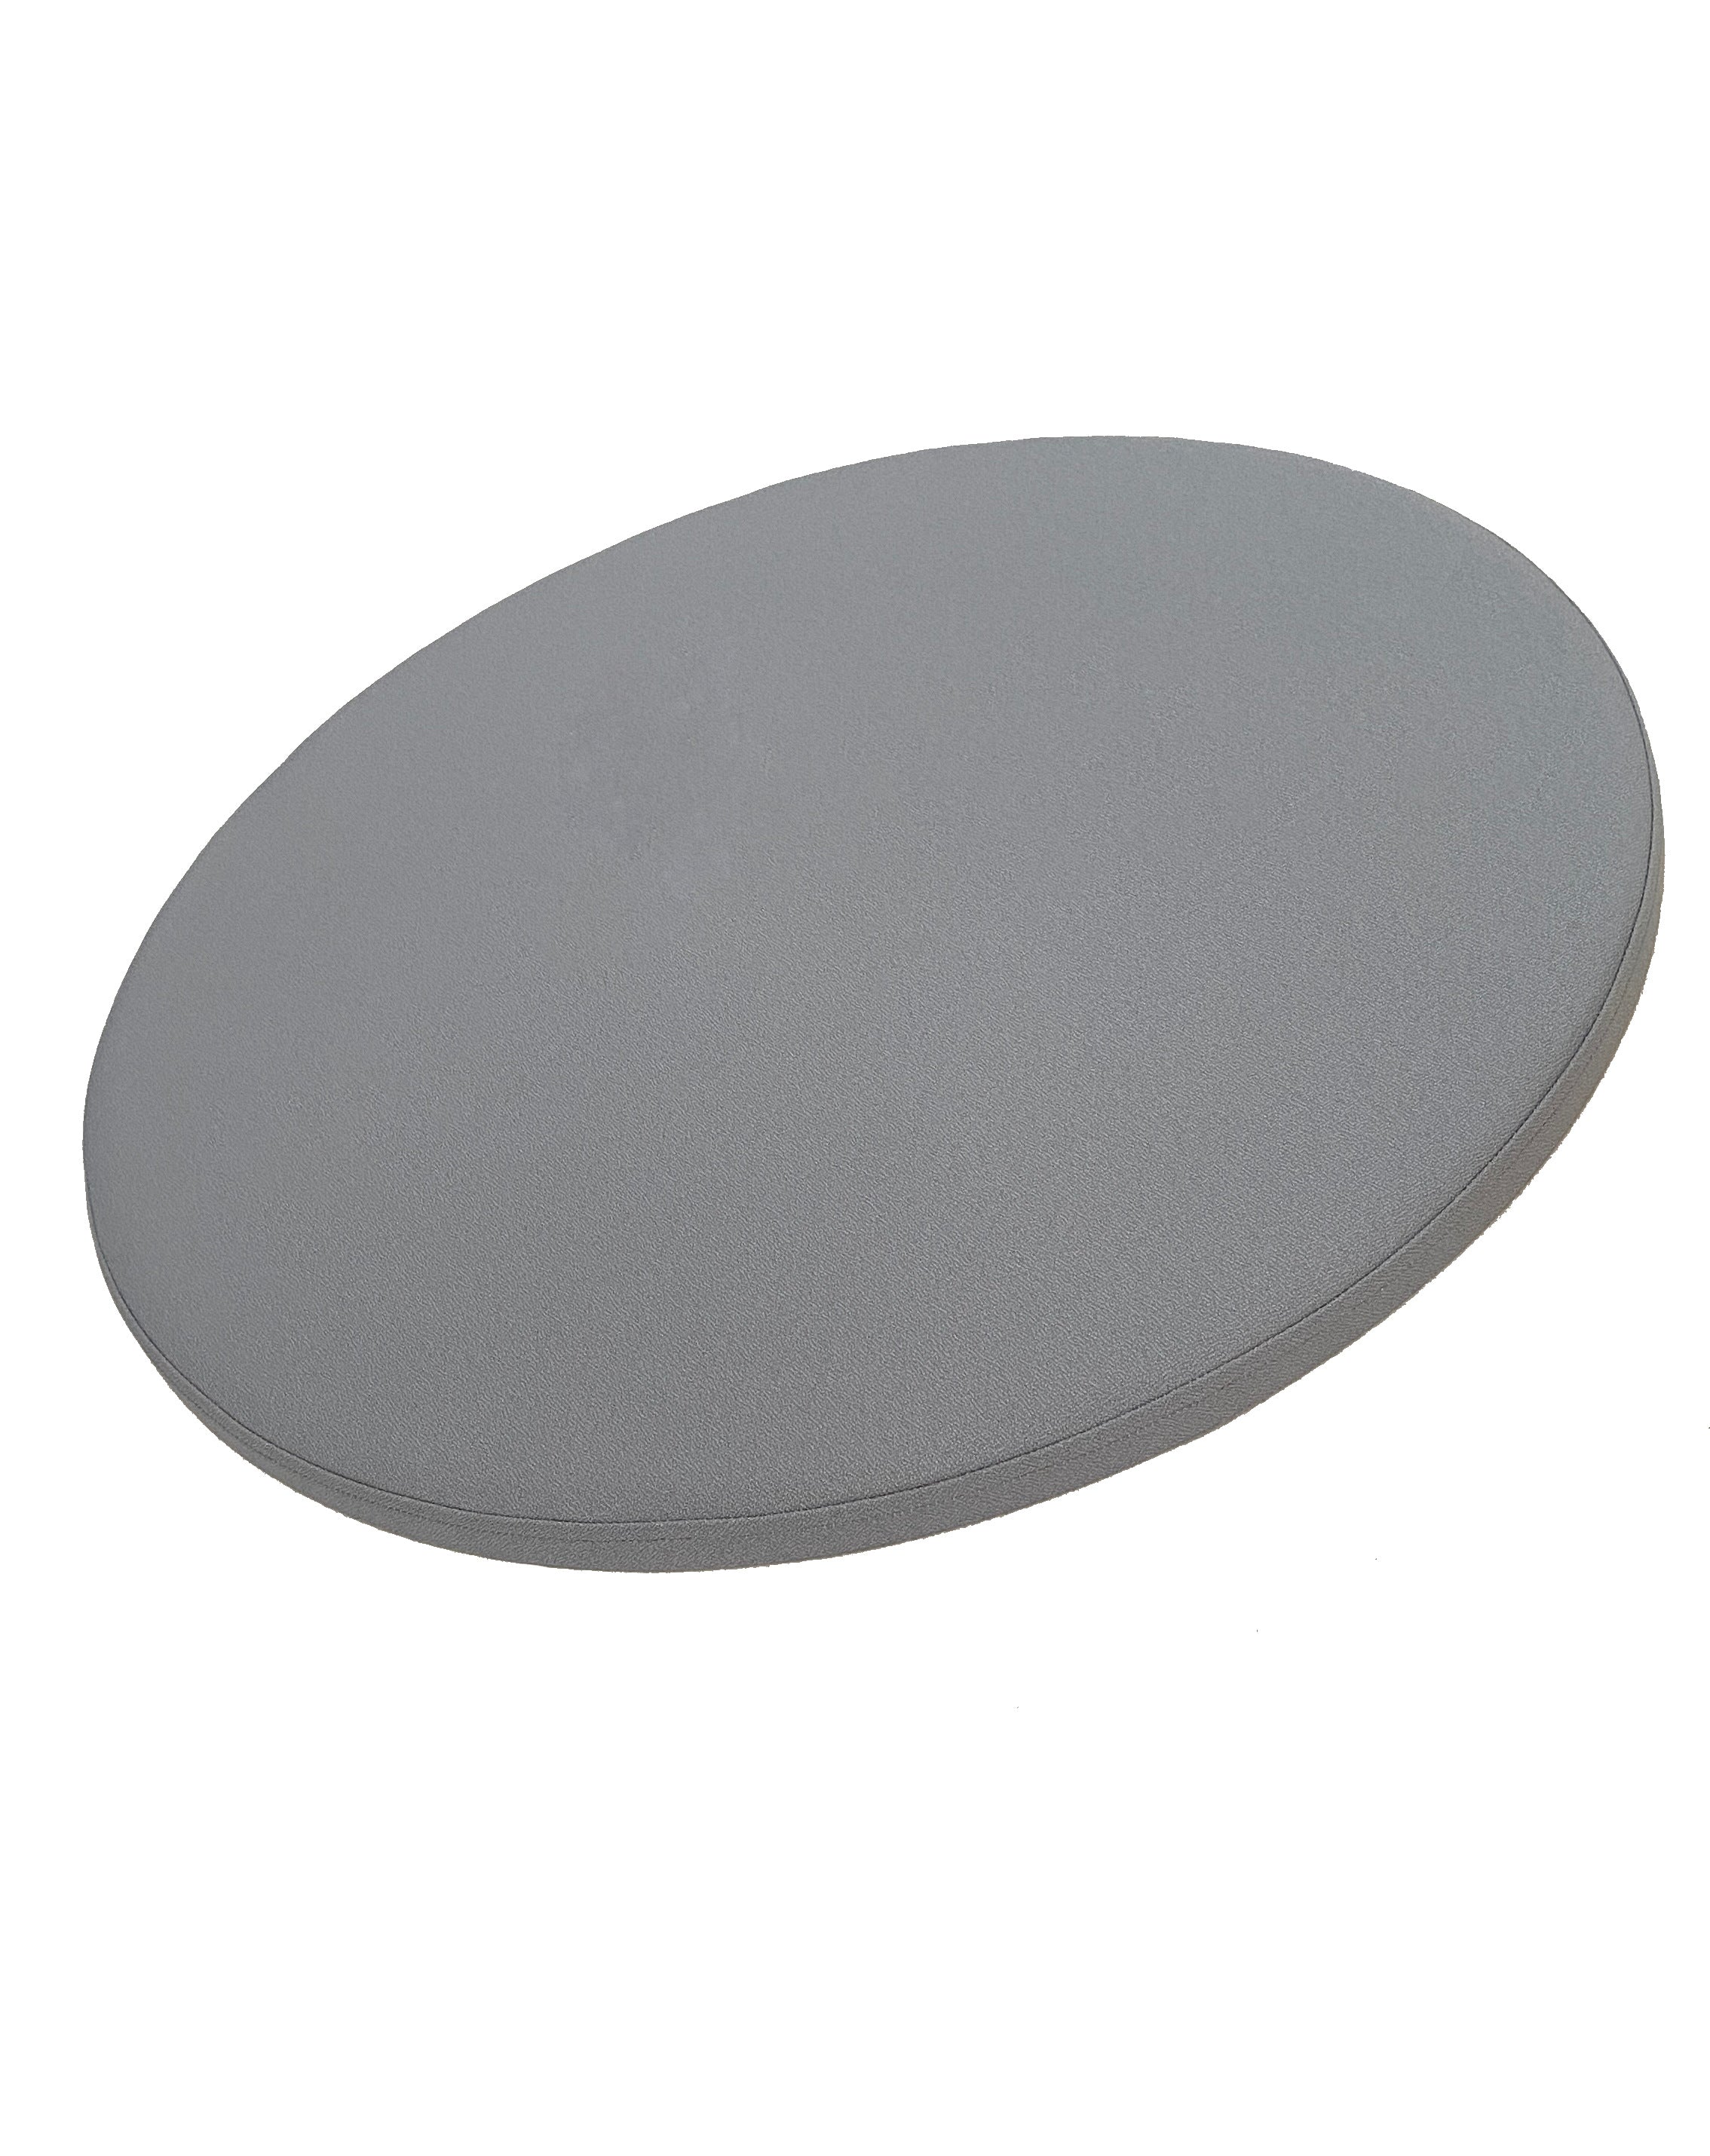 Cloud9 80cm Wall Mounted Acoustic Panel